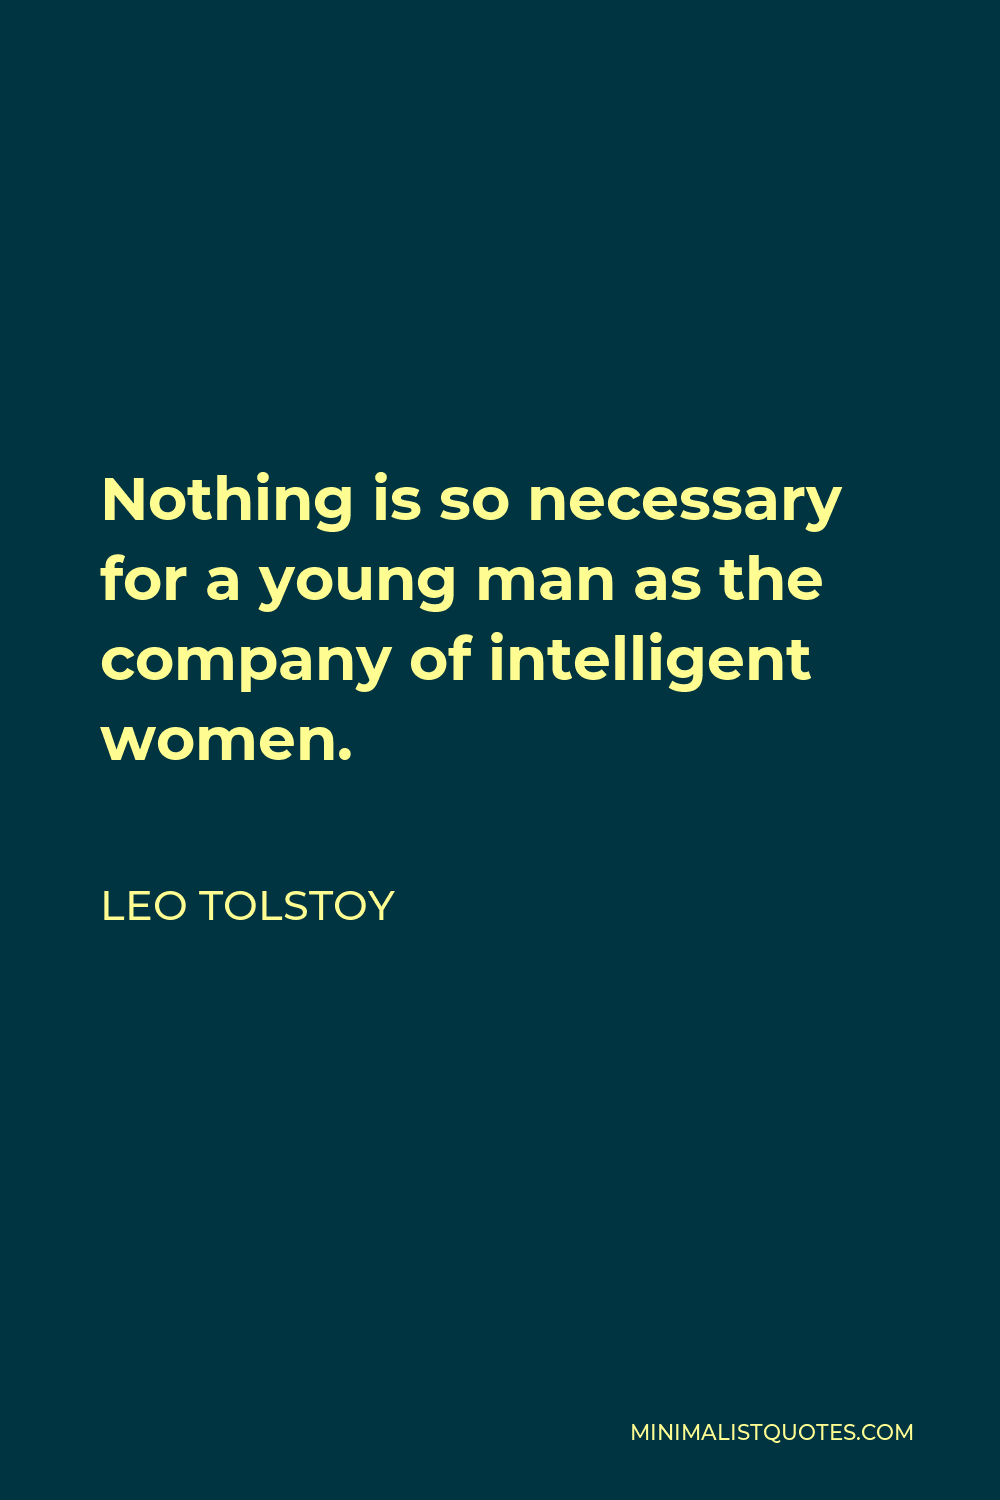 Leo Tolstoy Quote - Nothing is so necessary for a young man as the company of intelligent women.